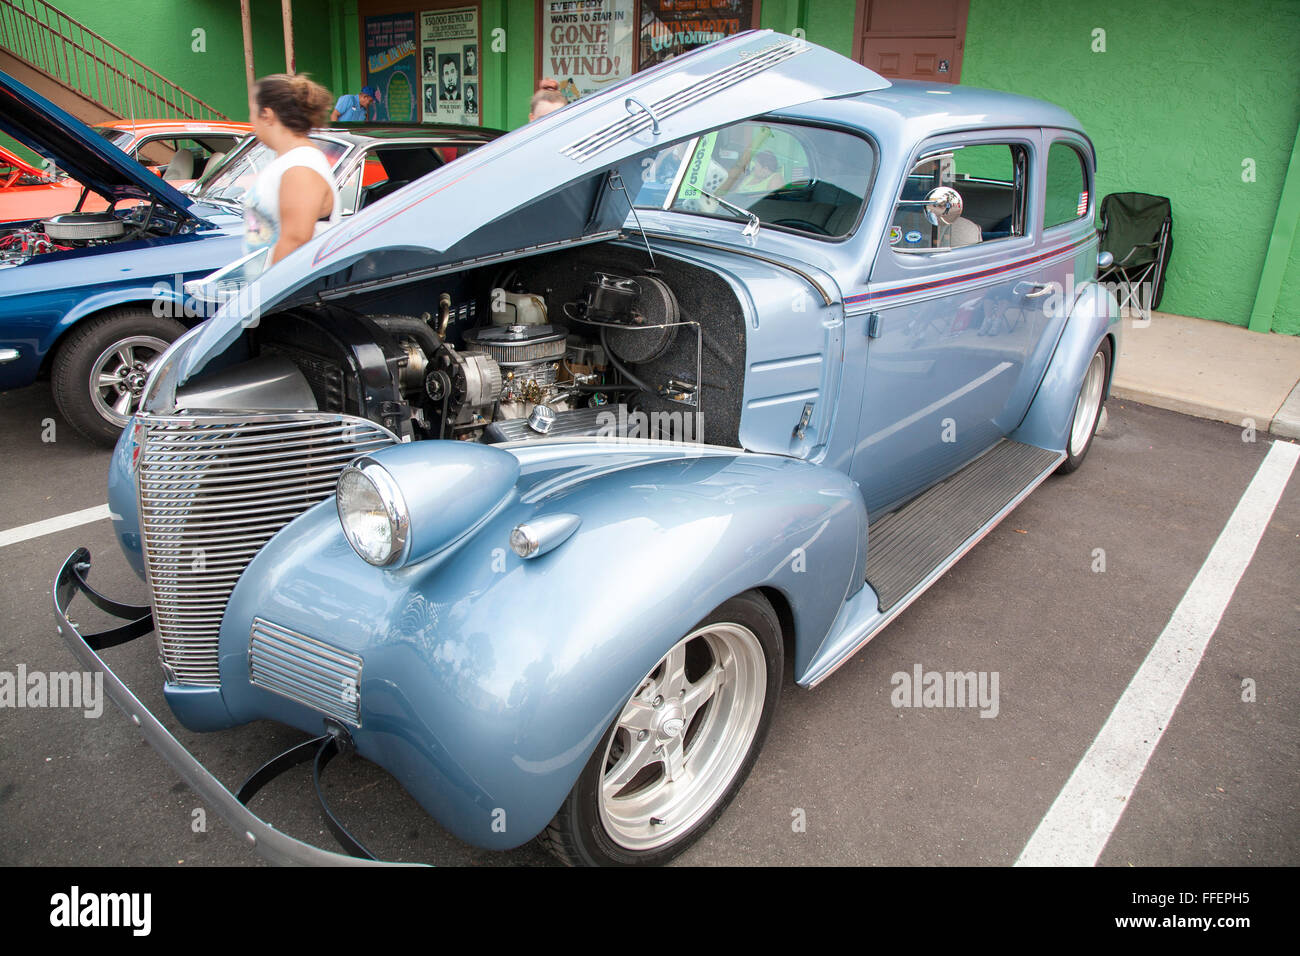 Classic car on display at Kissimmee Old Town weekly car cruise, Kissimmee Florida USA Stock Photo